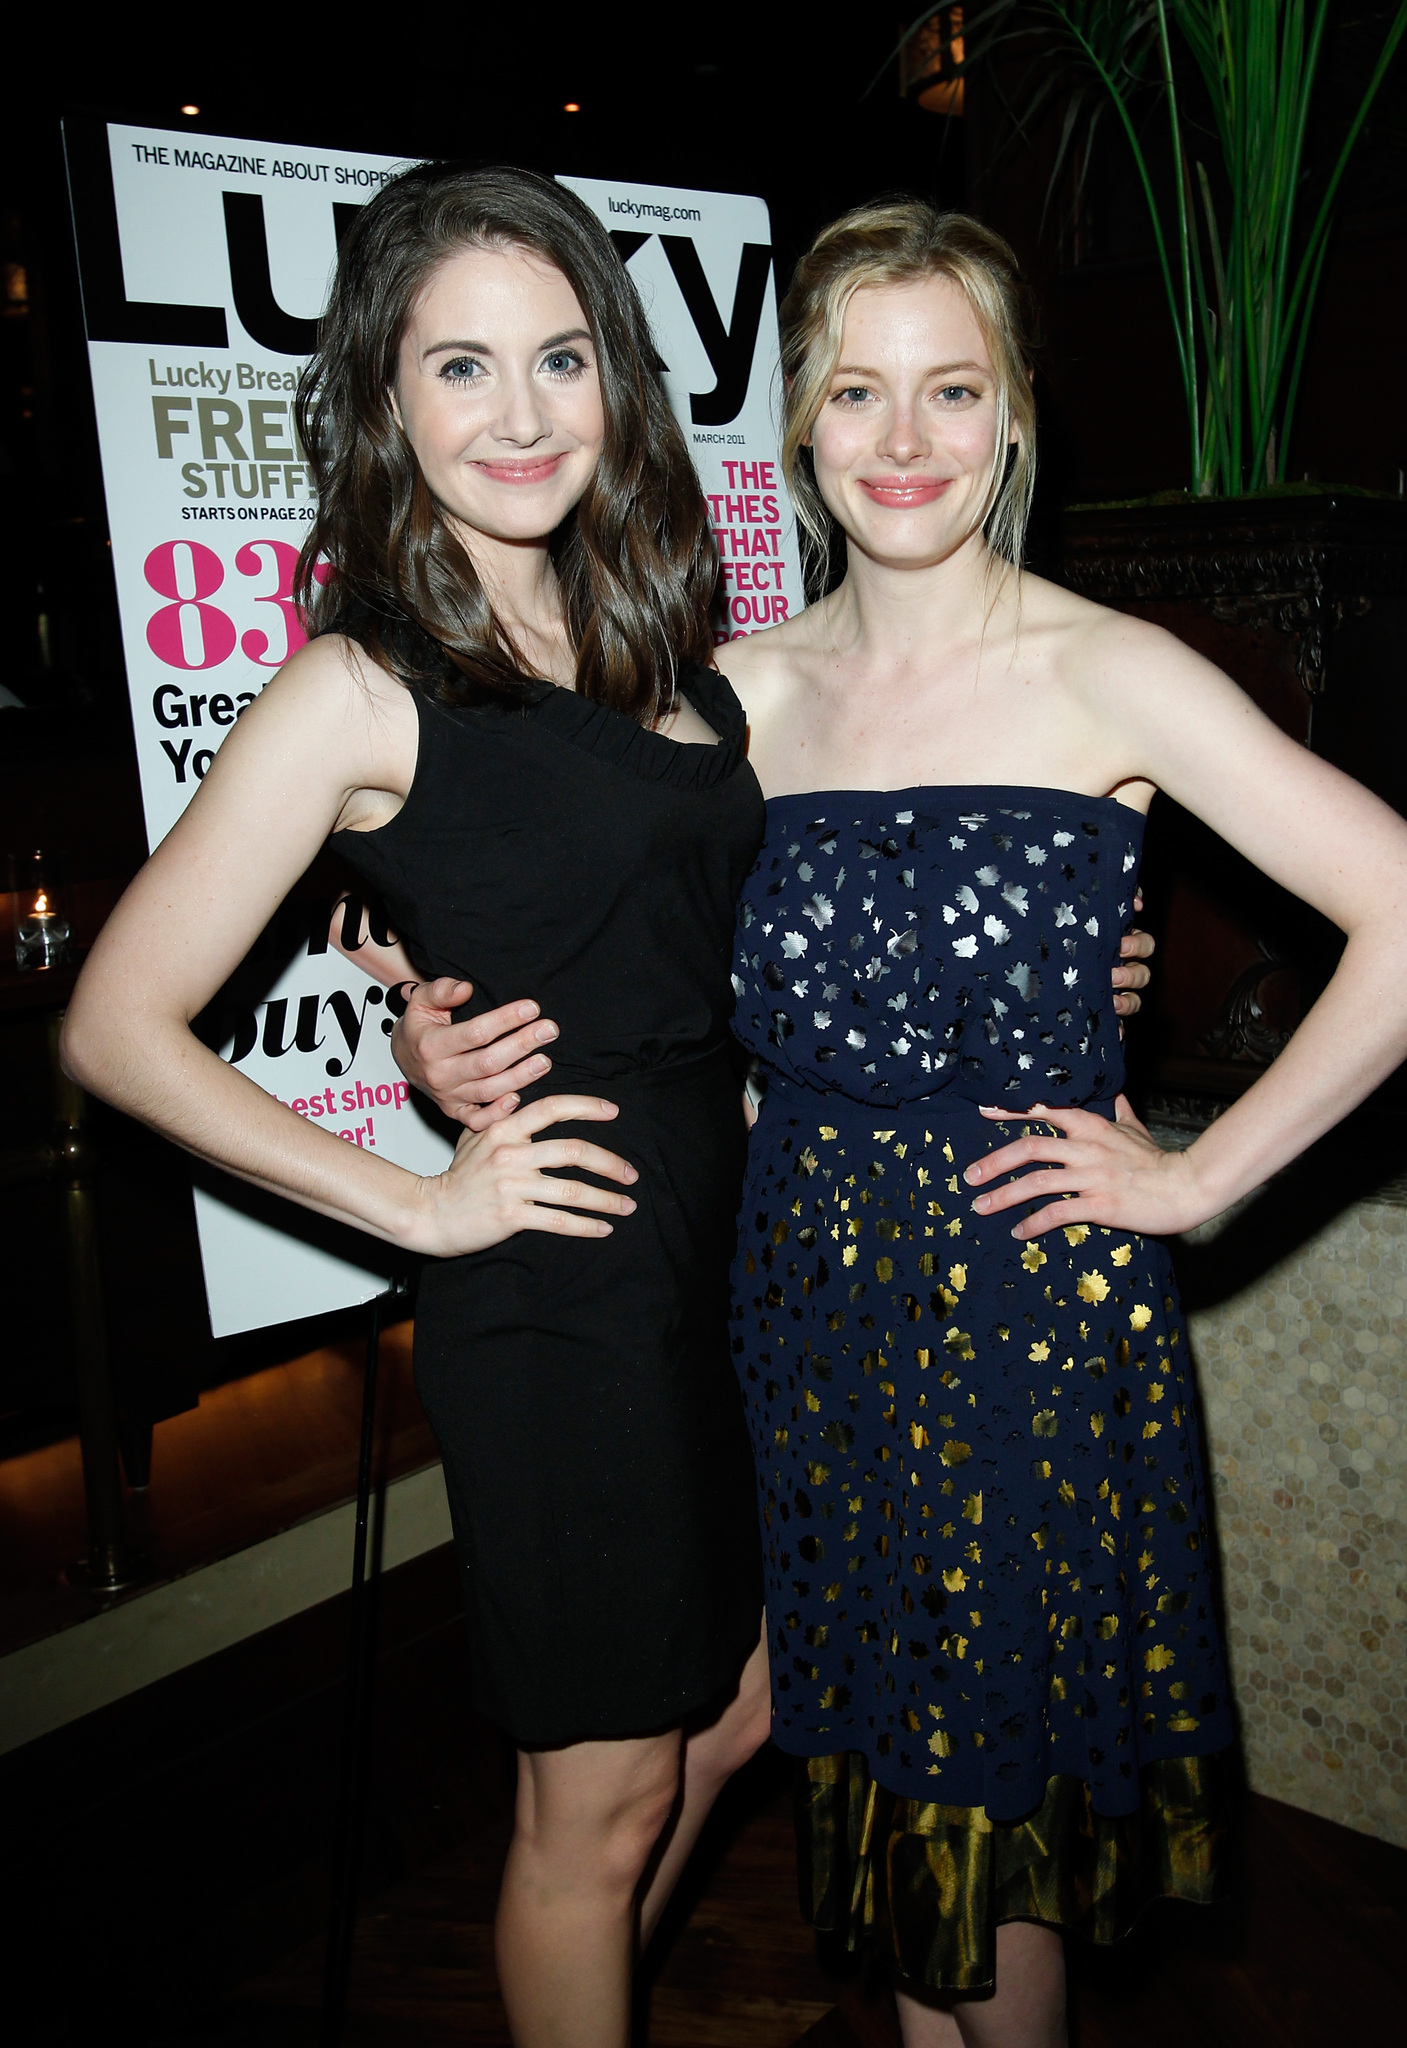 Alison Brie and Gillian Jacobs